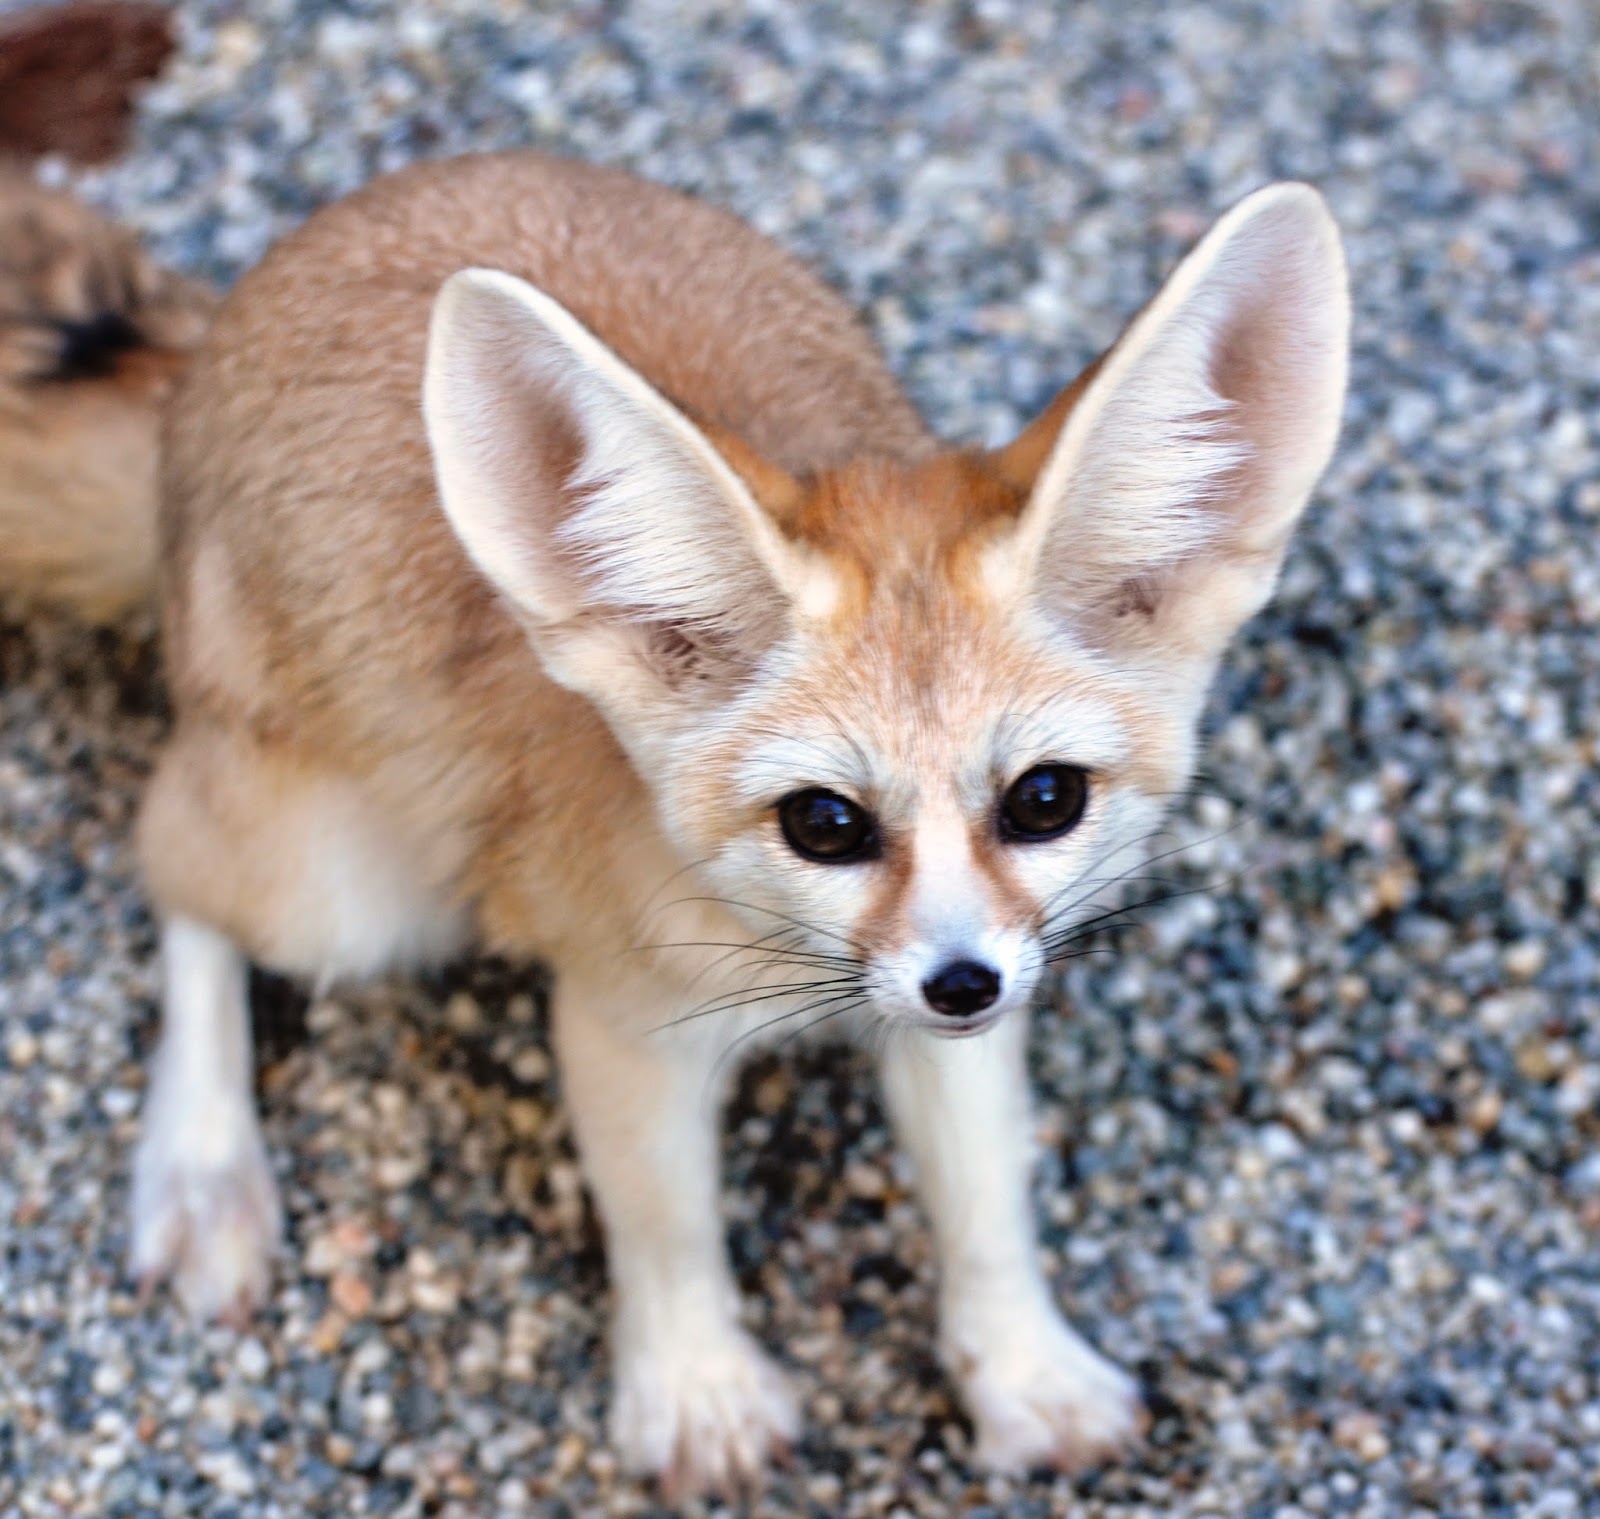 The Official Sacramento Zoo Blog: Fennec Foxes at the Zoo!